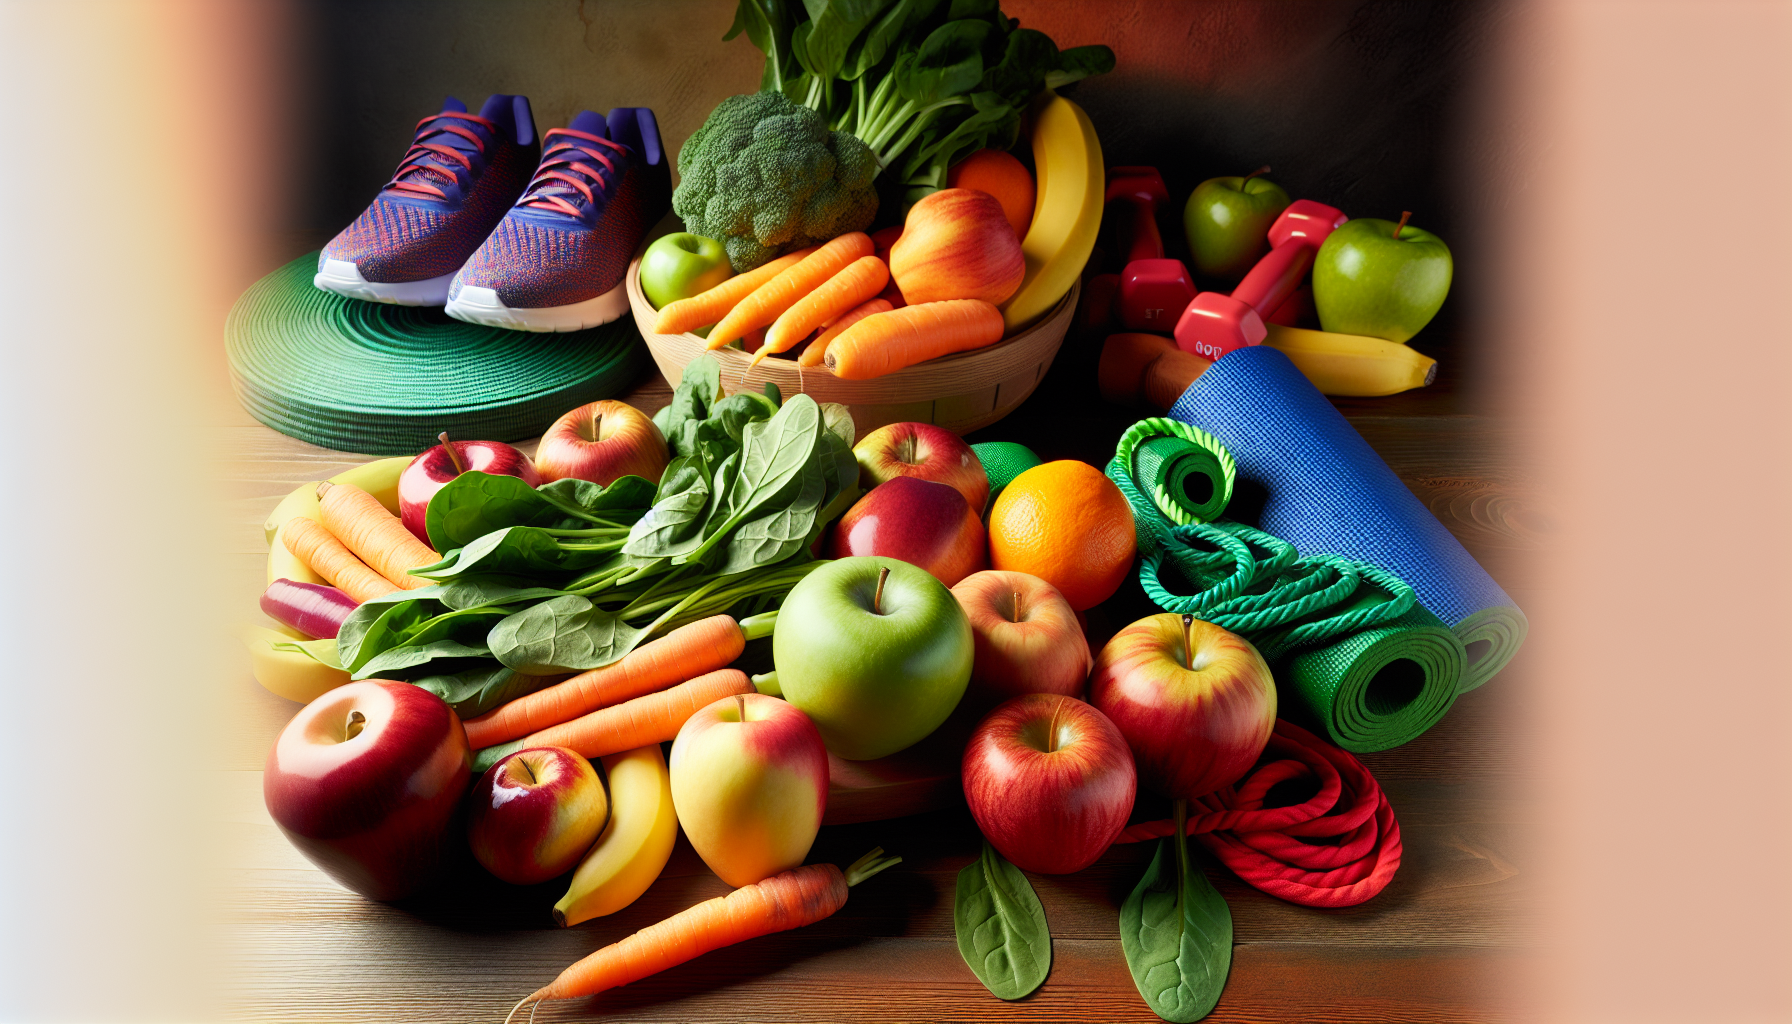 Healthy lifestyle and wellness concept with fruits, vegetables, and exercise equipment